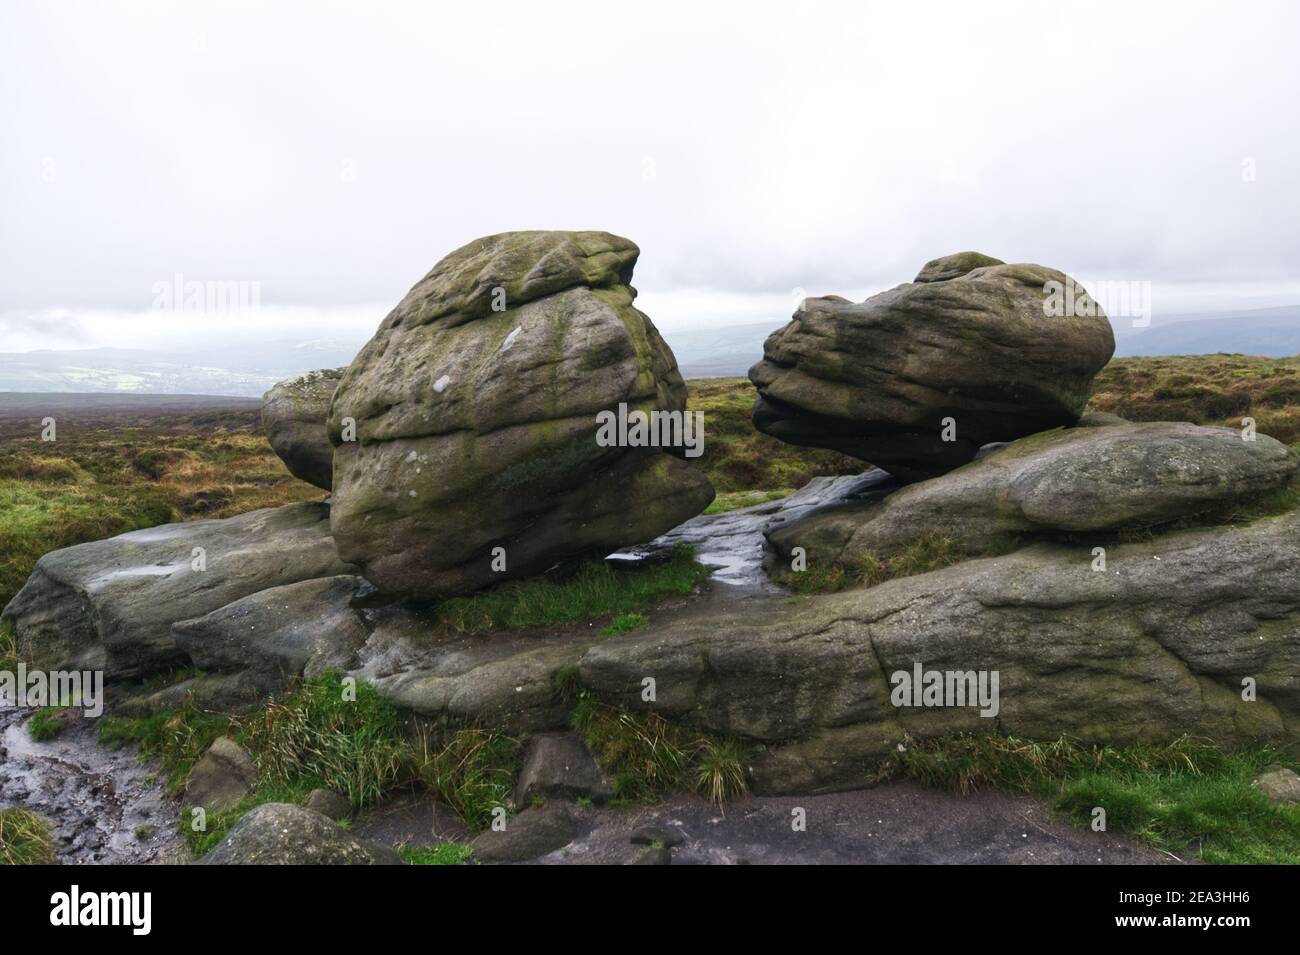 Wain Stones, also know as Kissing stones on Bleaklow, in the Peak District National Park, Derbyshire, England UK Stock Photo